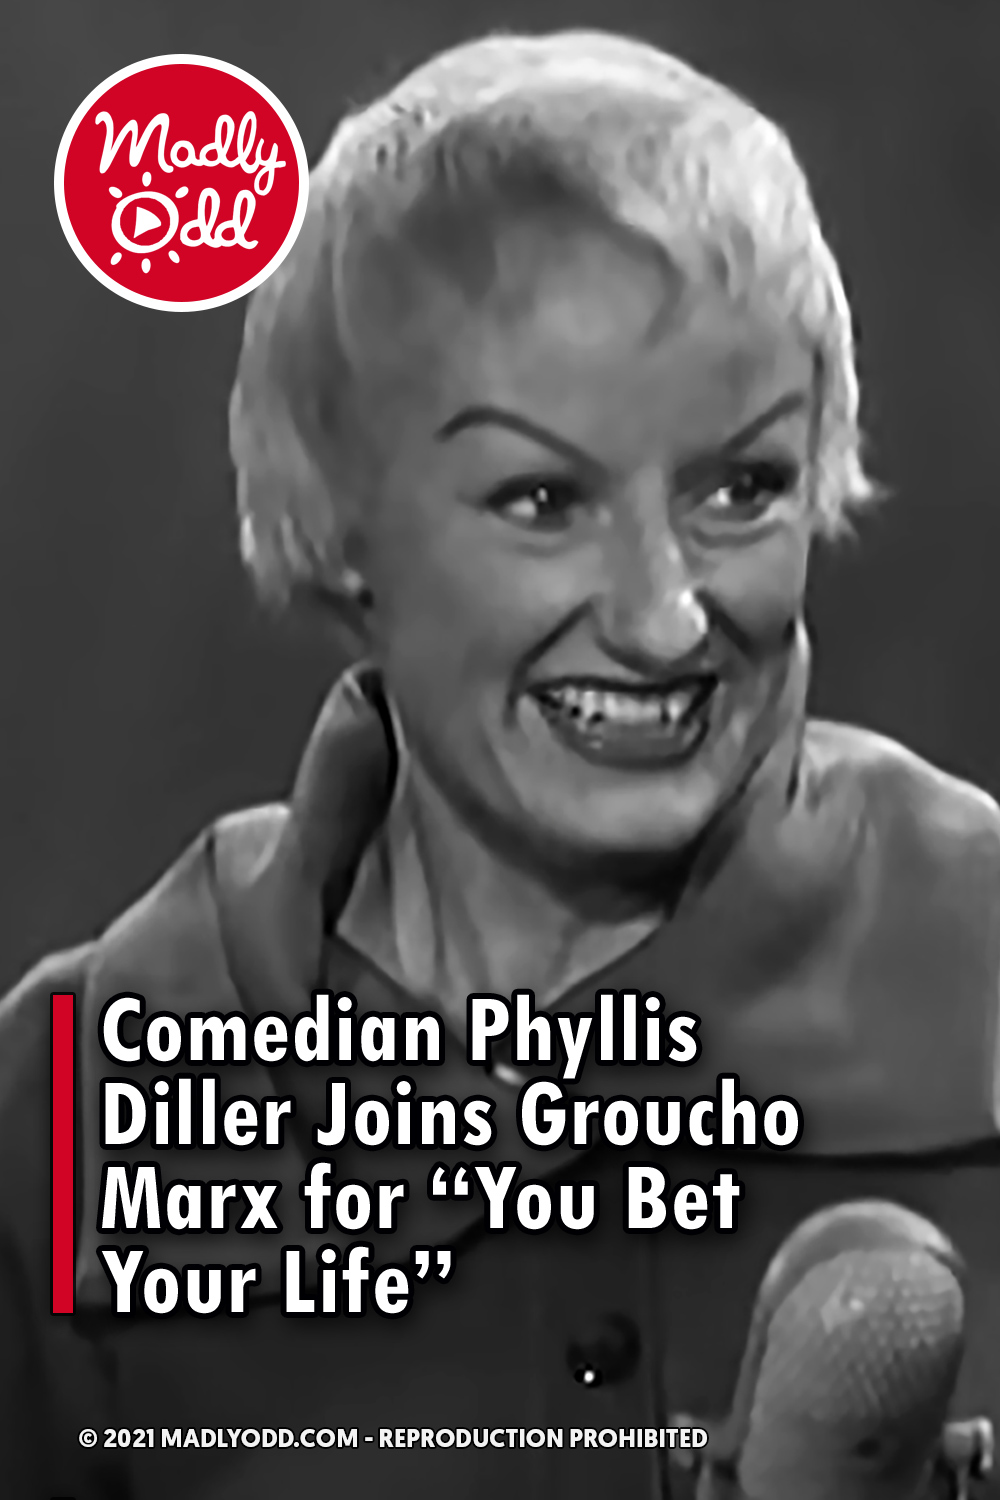 Comedian Phyllis Diller Joins Groucho Marx for “You Bet Your Life”